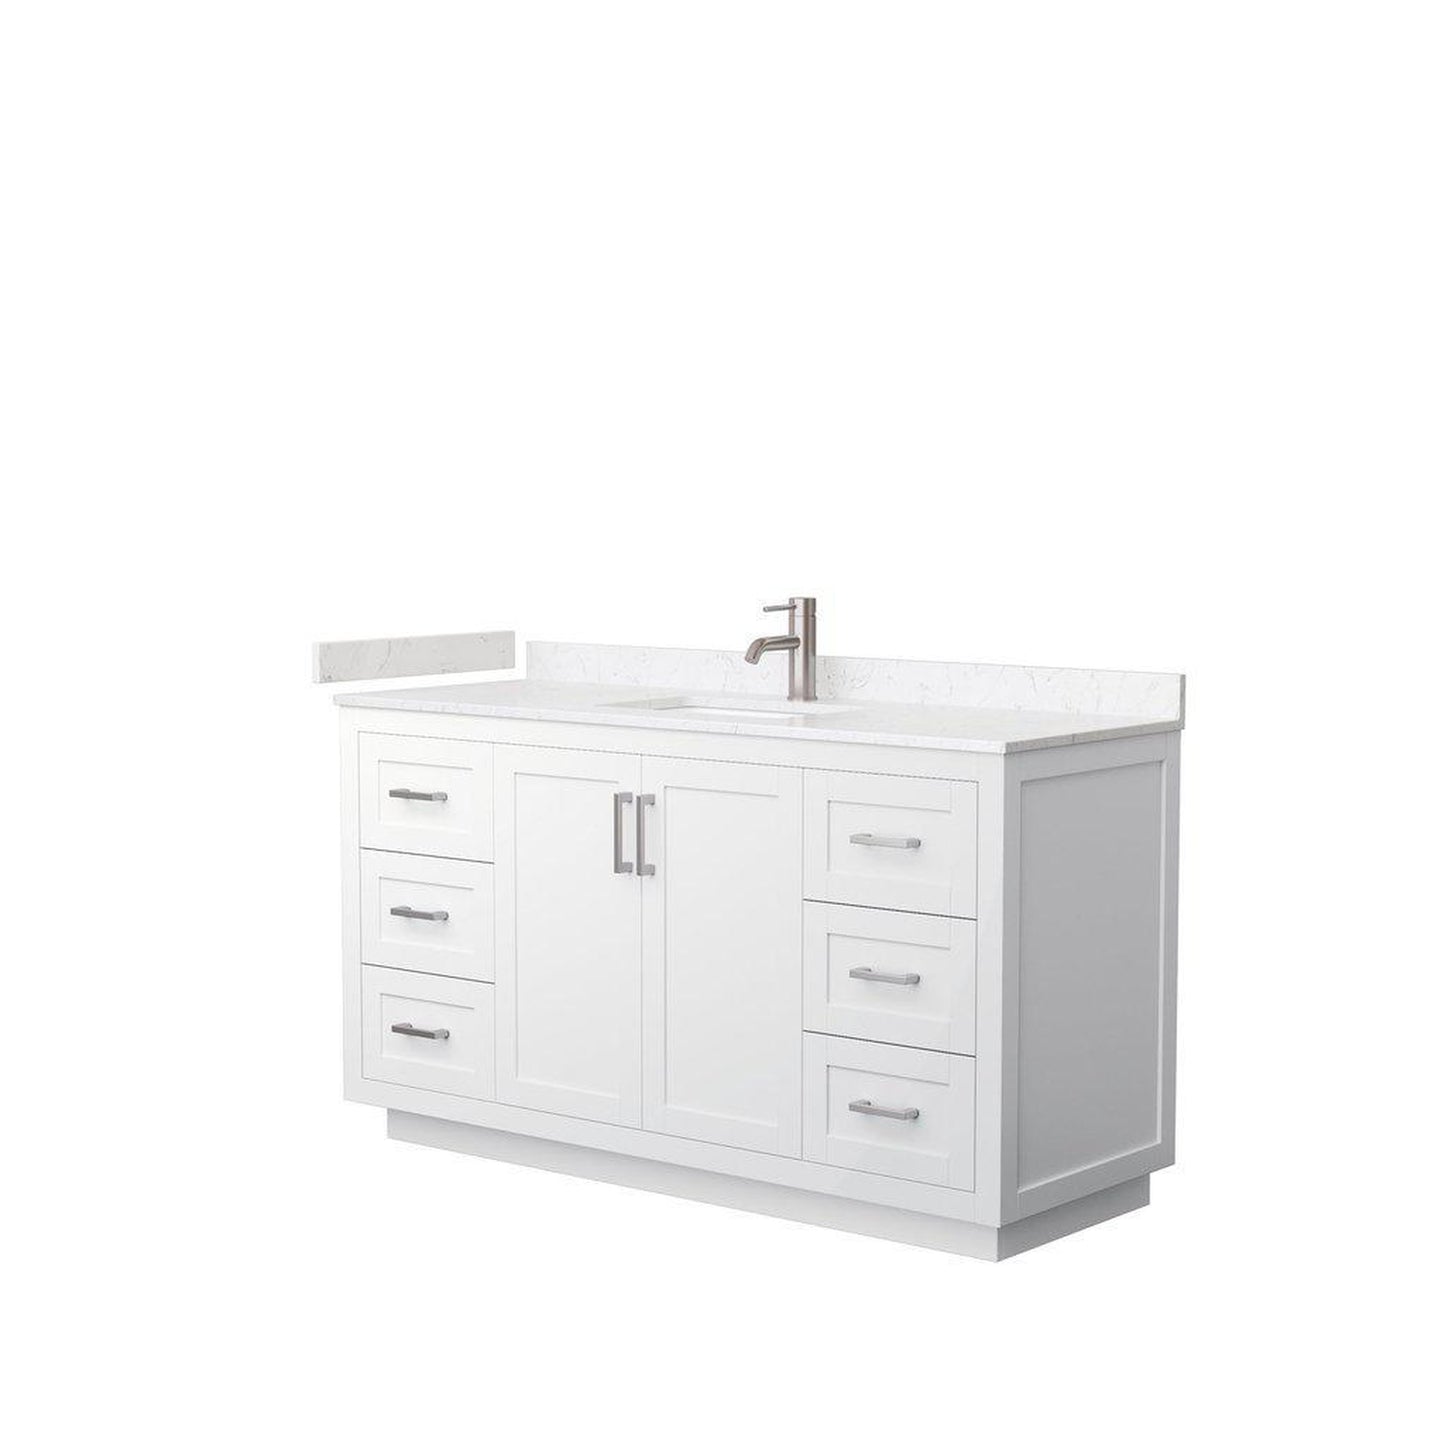 Wyndham Collection Miranda 60" Single Bathroom White Vanity Set With Light-Vein Carrara Cultured Marble Countertop, Undermount Square Sink, And Brushed Nickel Trim